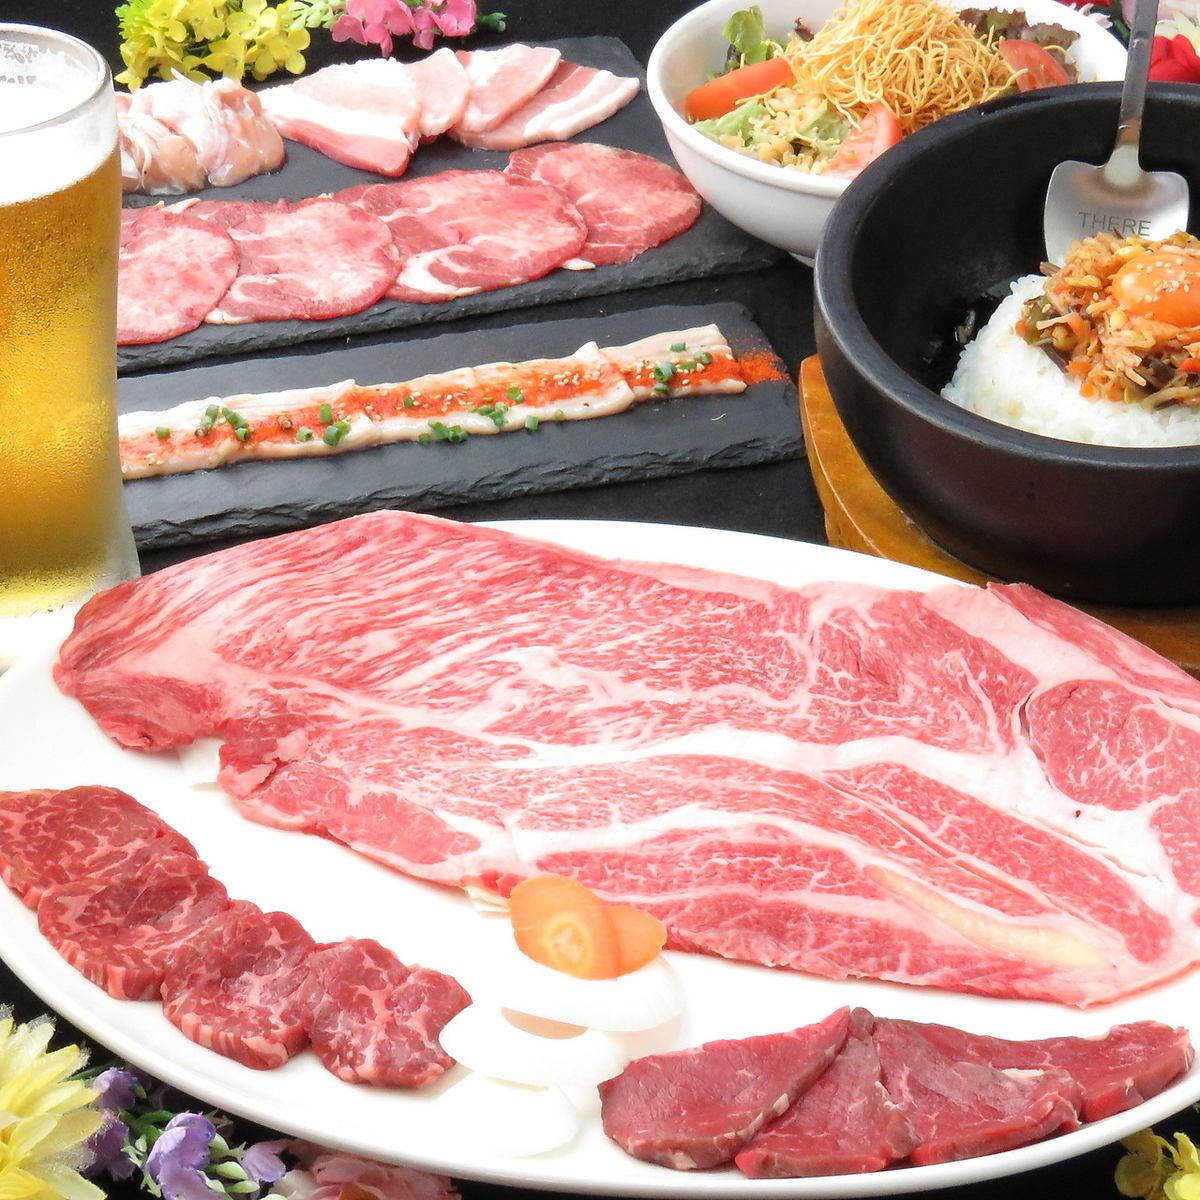 You can enjoy high-quality meat at a low price ◎ Private rooms with horigotatsu, tatami mats, and table seats are available!